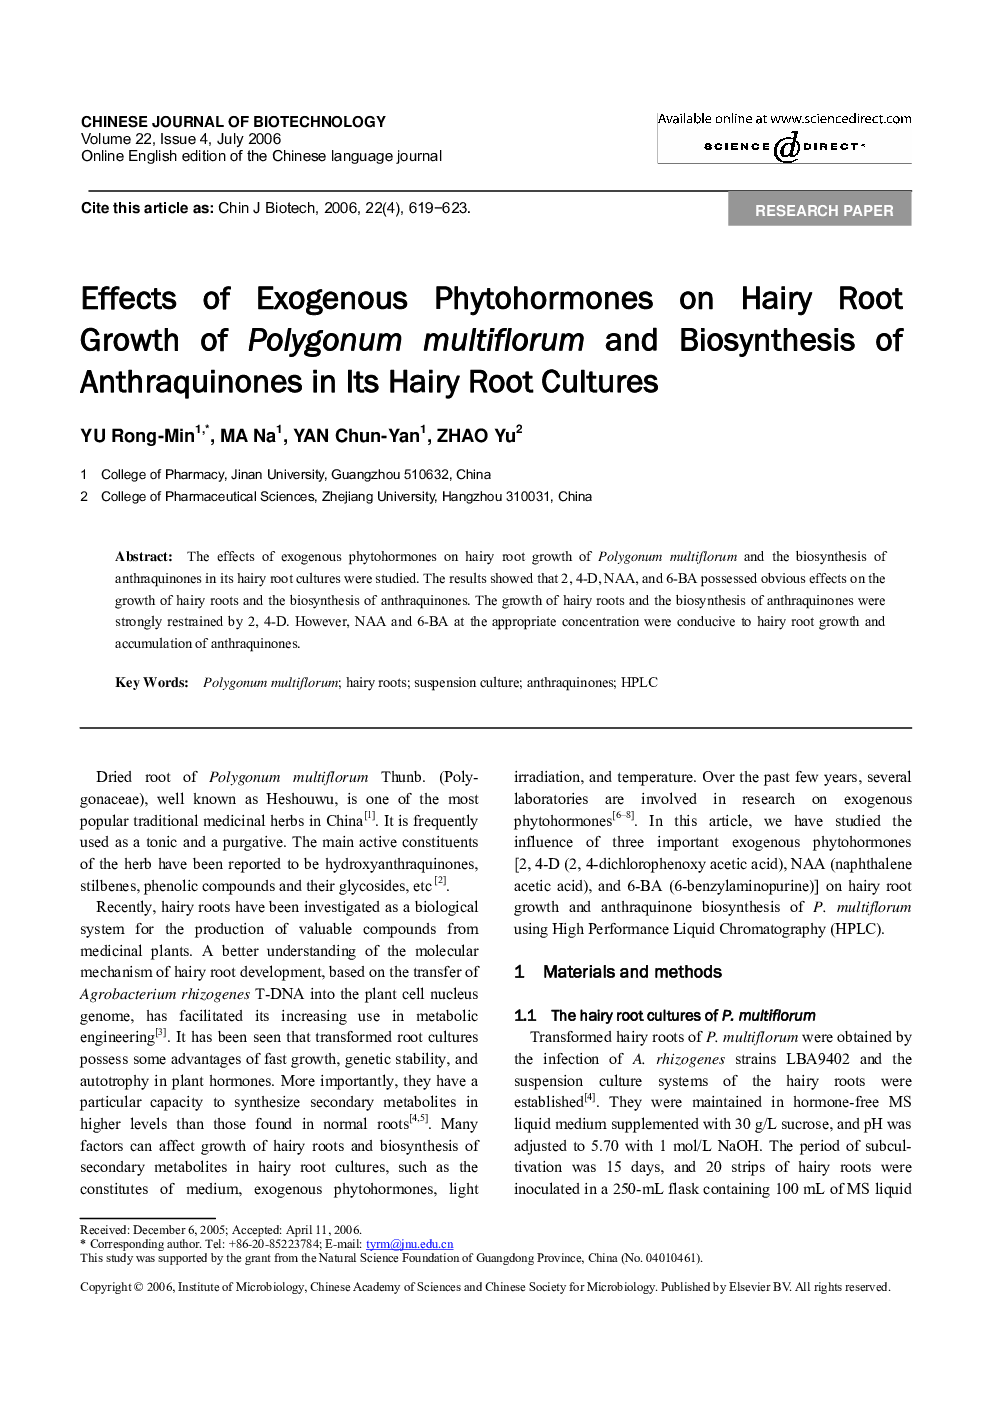 Effects of Exogenous Phytohormones on Hairy Root Growth of Polygonum multiflorum and Biosynthesis of Anthraquinones in Its Hairy Root Cultures